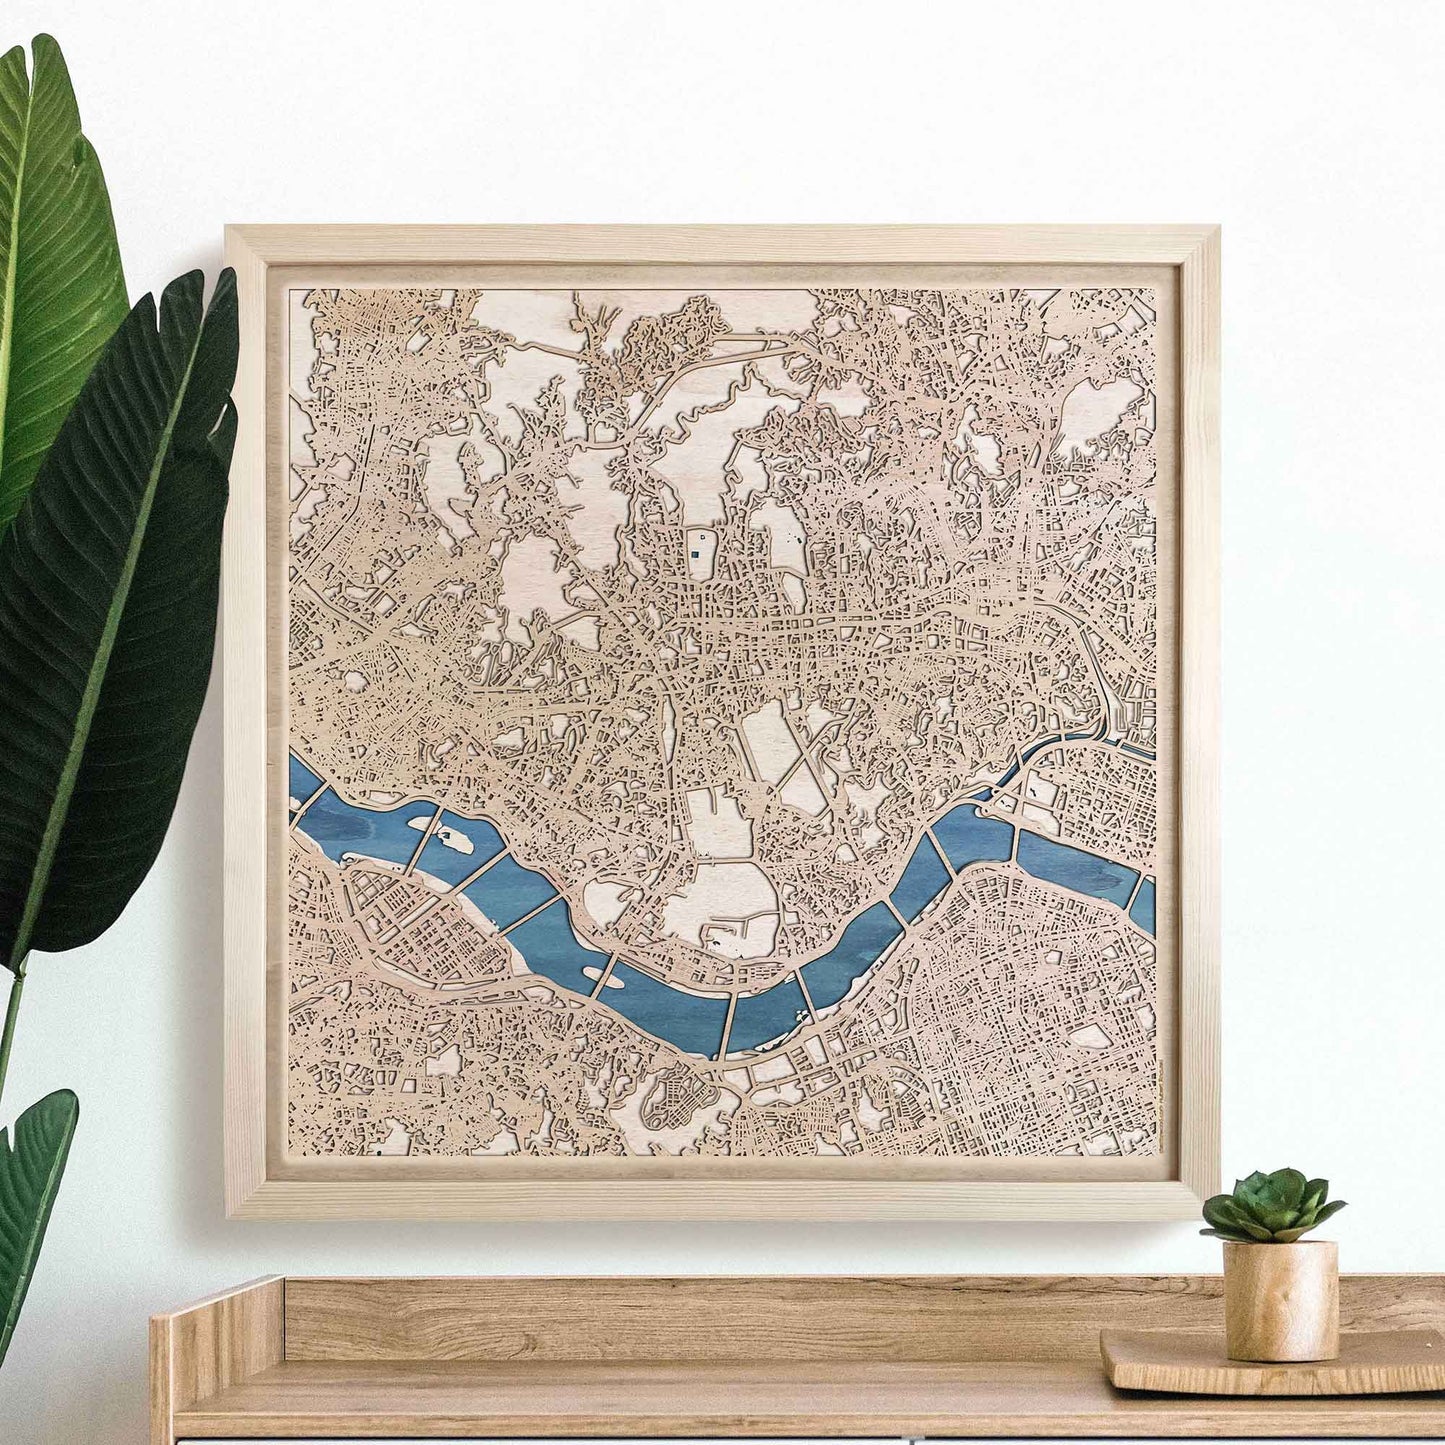 Seoul Wooden Map by CityWood - Custom Wood Map Art - Unique Laser Cut Engraved - Anniversary Gift